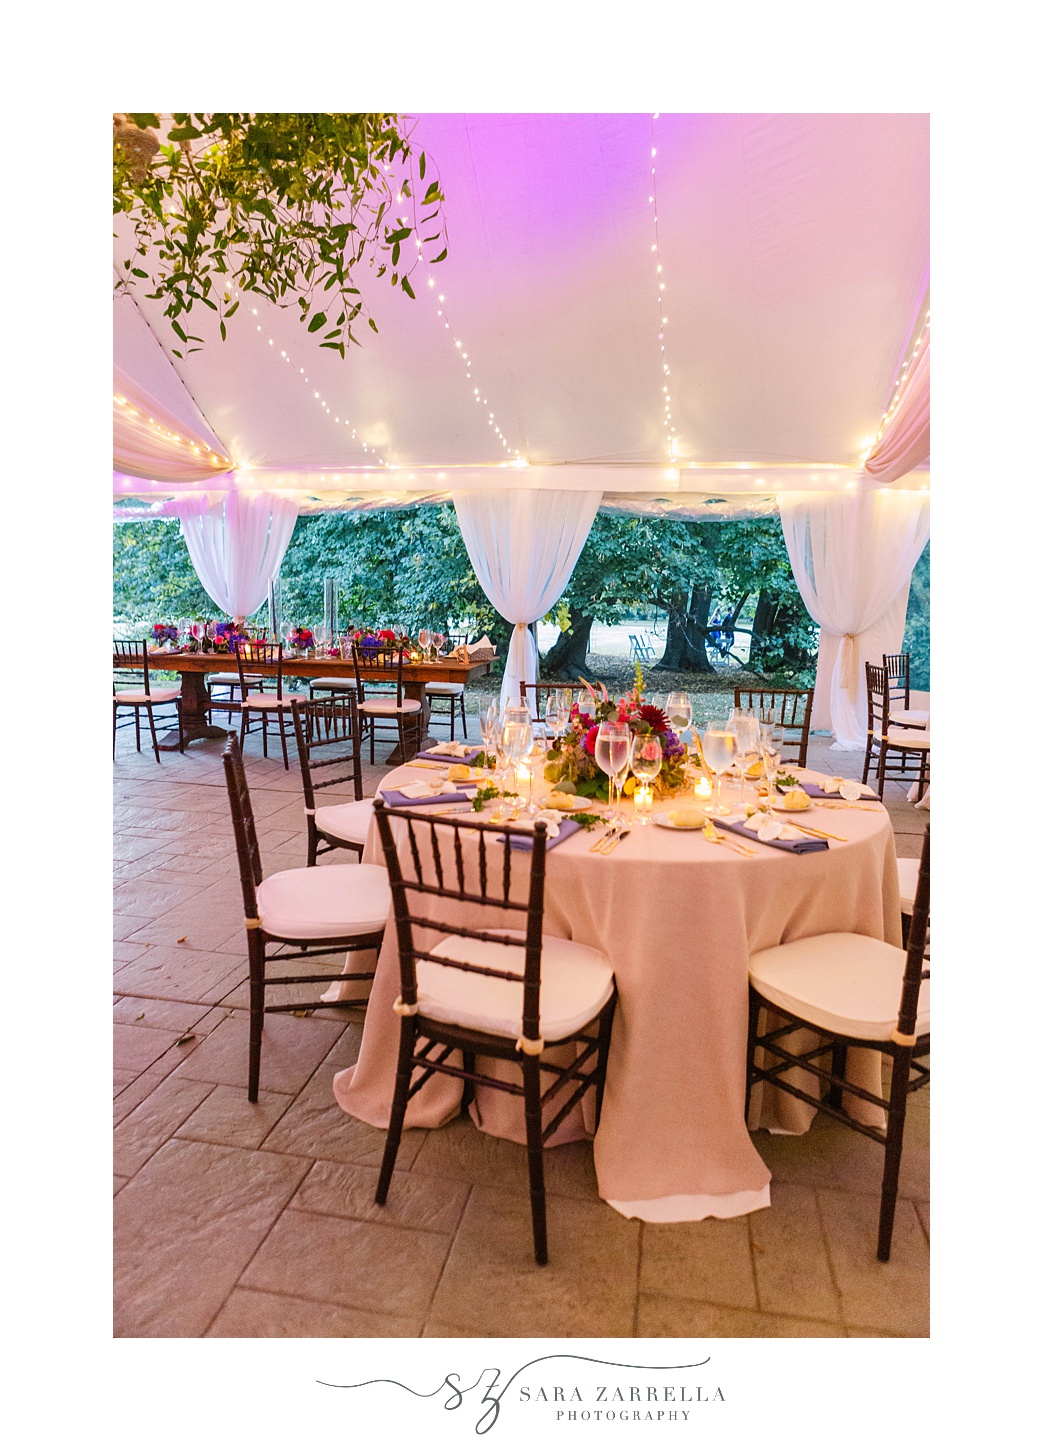 Blithewold Mansion wedding reception details with pink uplighting